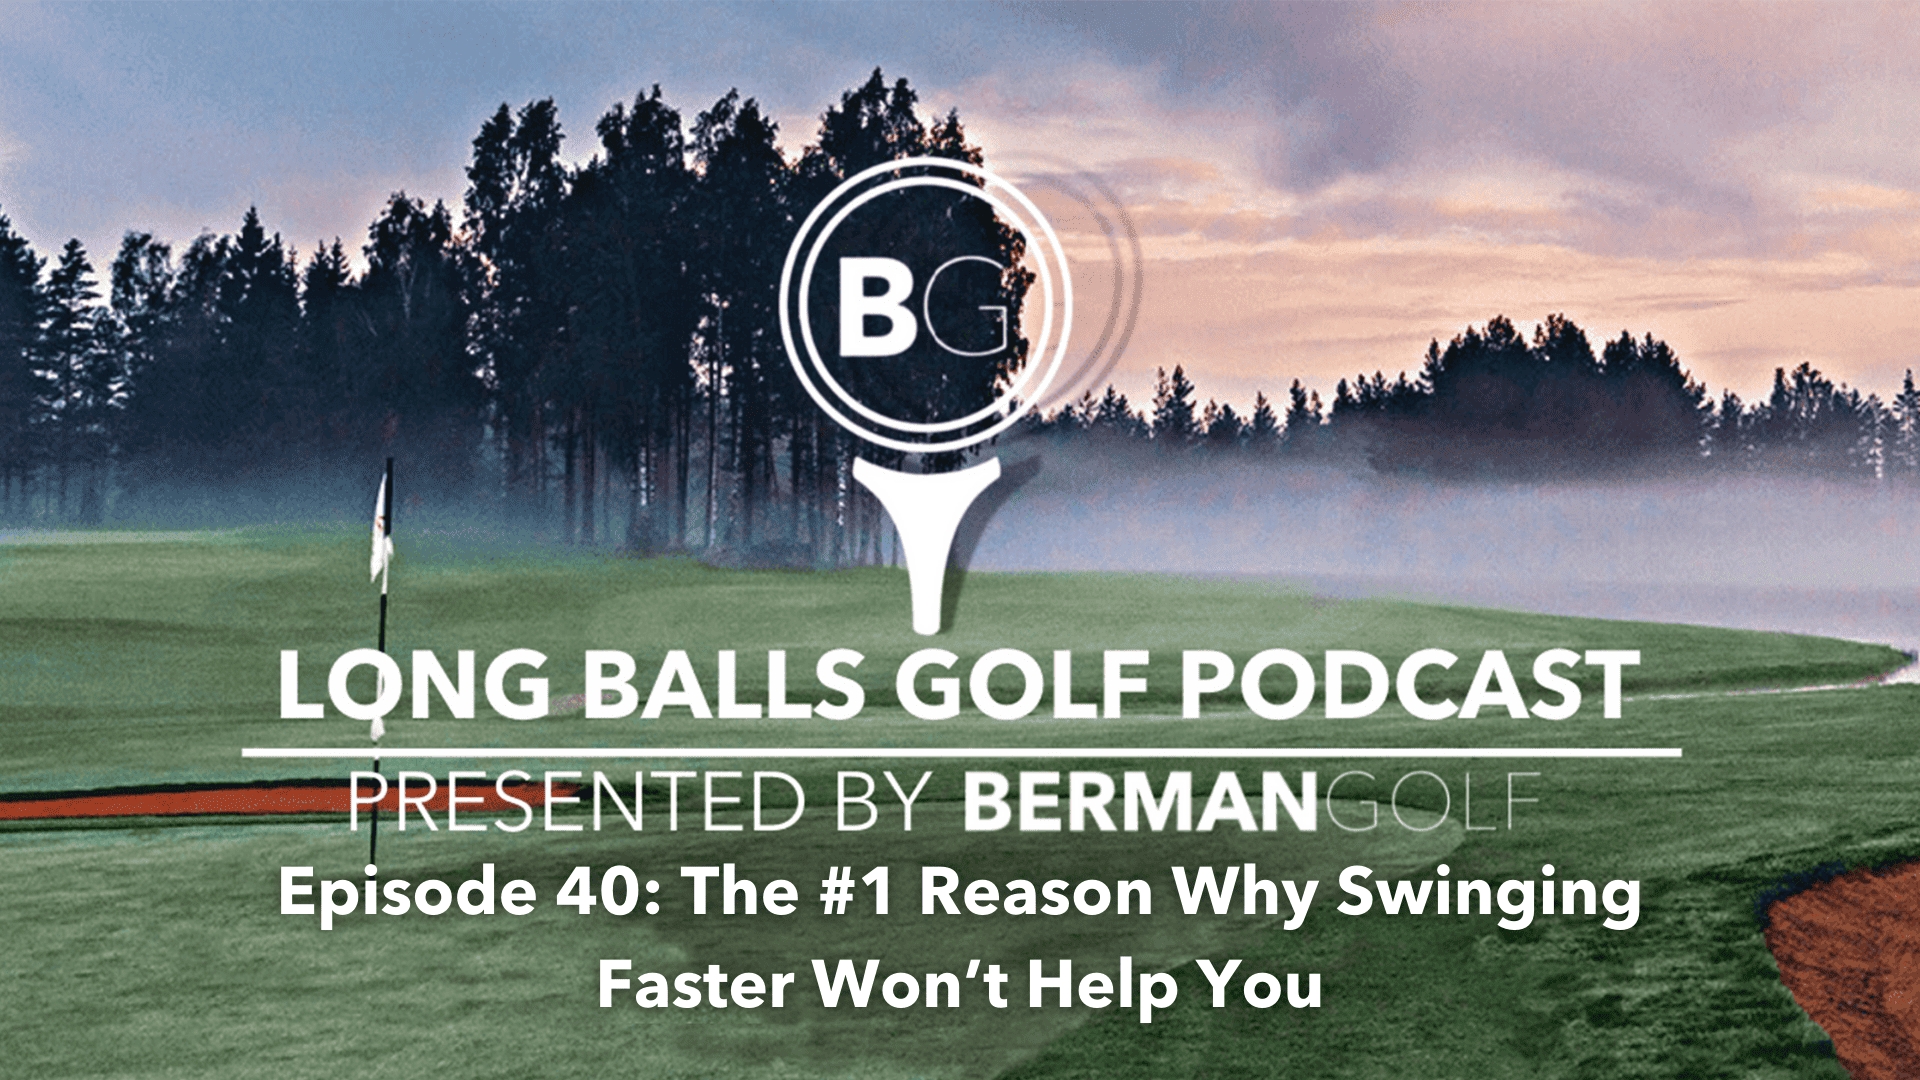 Episode 40: The #1 Reason Why Swinging Faster Won’t Help You